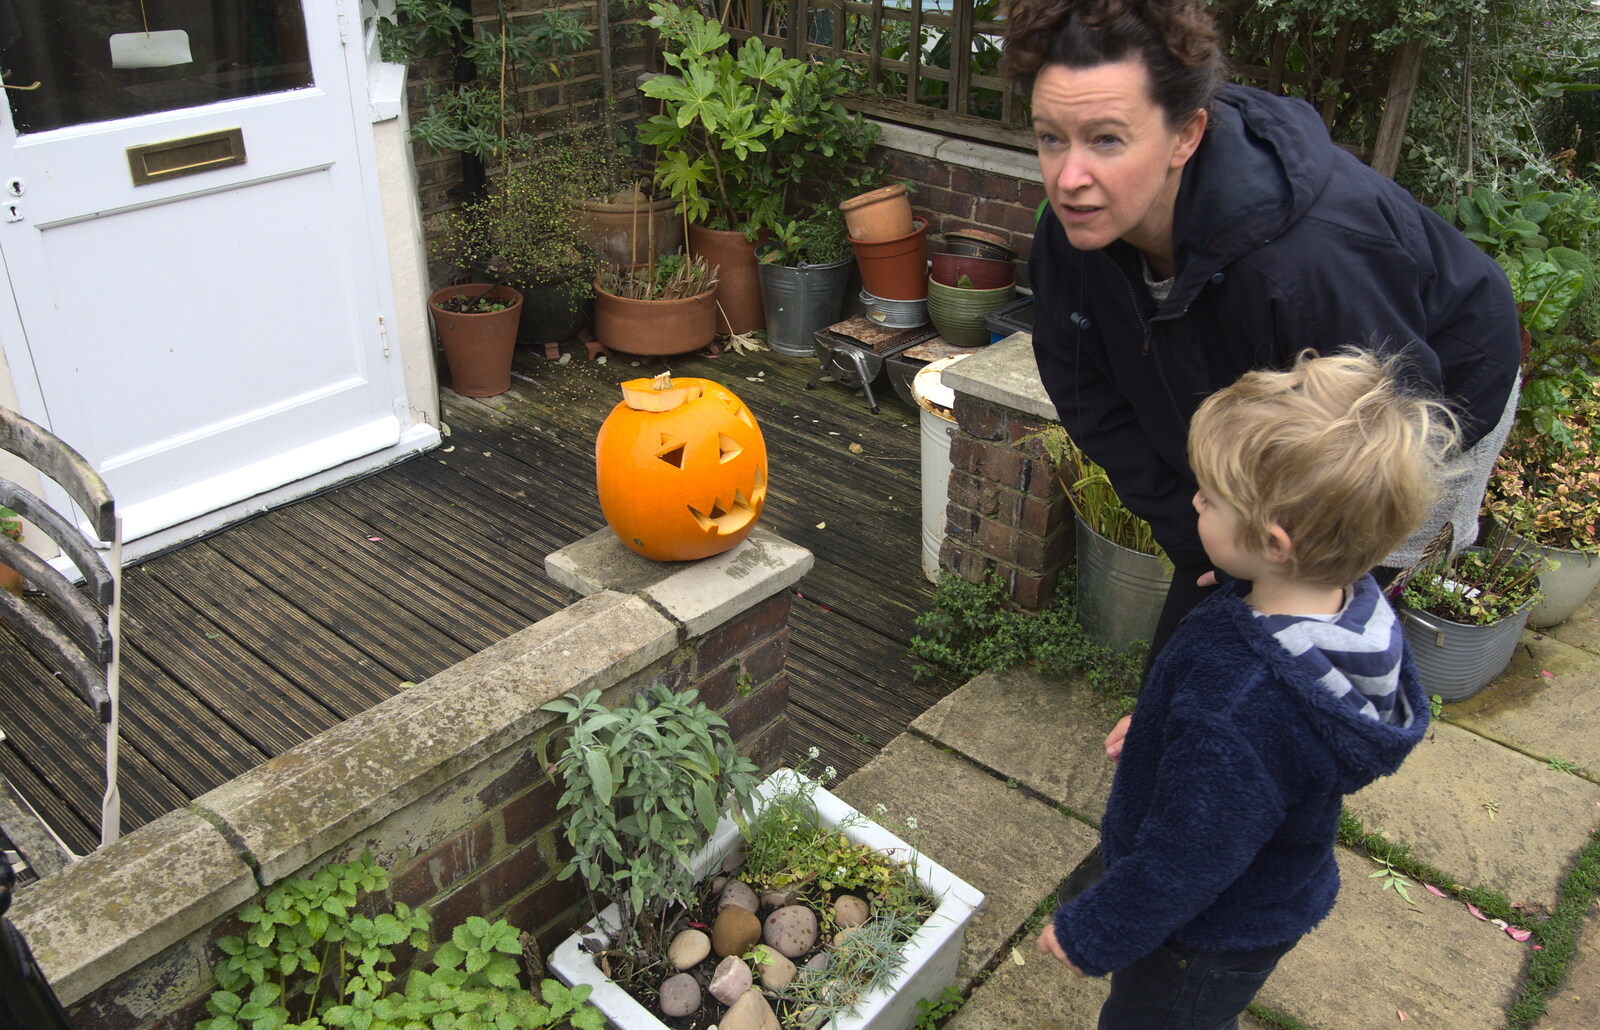 Evelyn and Fred look at a pumpkin from Another Trip to Peckham, Southwark, London - 28th October 2012